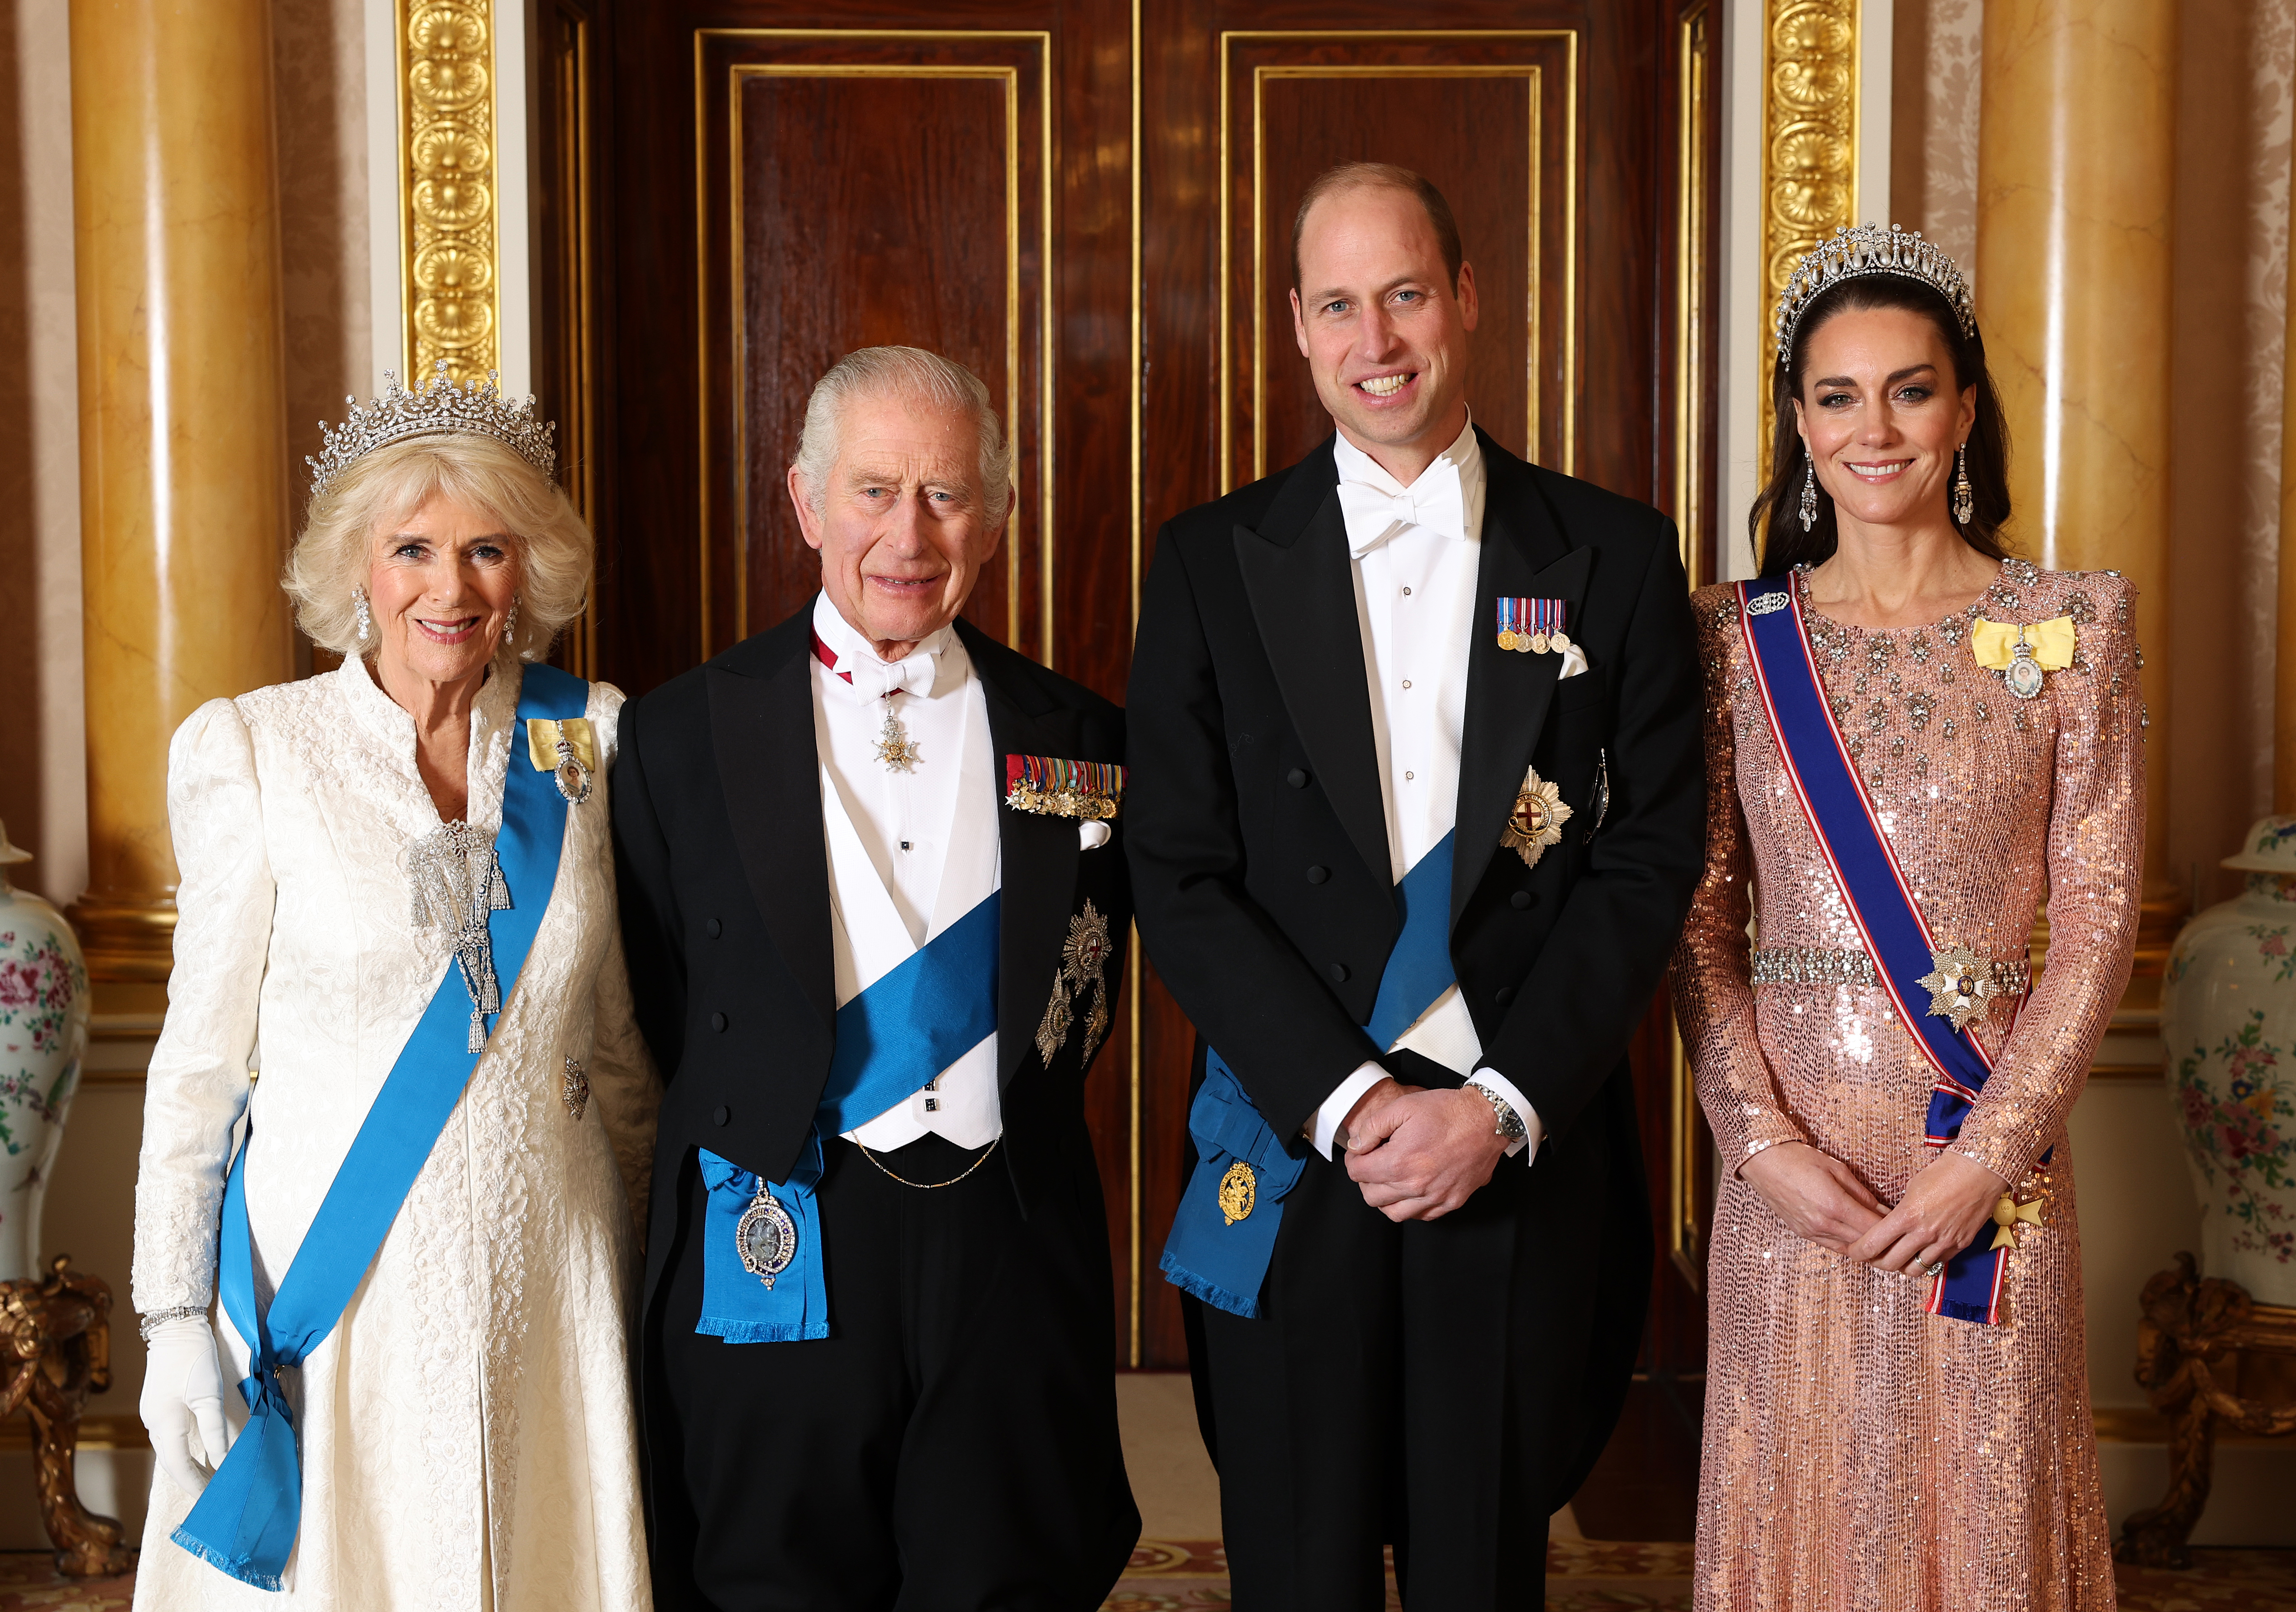 King Charles III, Queen Camilla, Prince William, and Princess Catherine before the  The Diplomatic Reception in the 1844 Room at Buckingham Palace on December 05, 2023 in London, England | Source: Getty Images